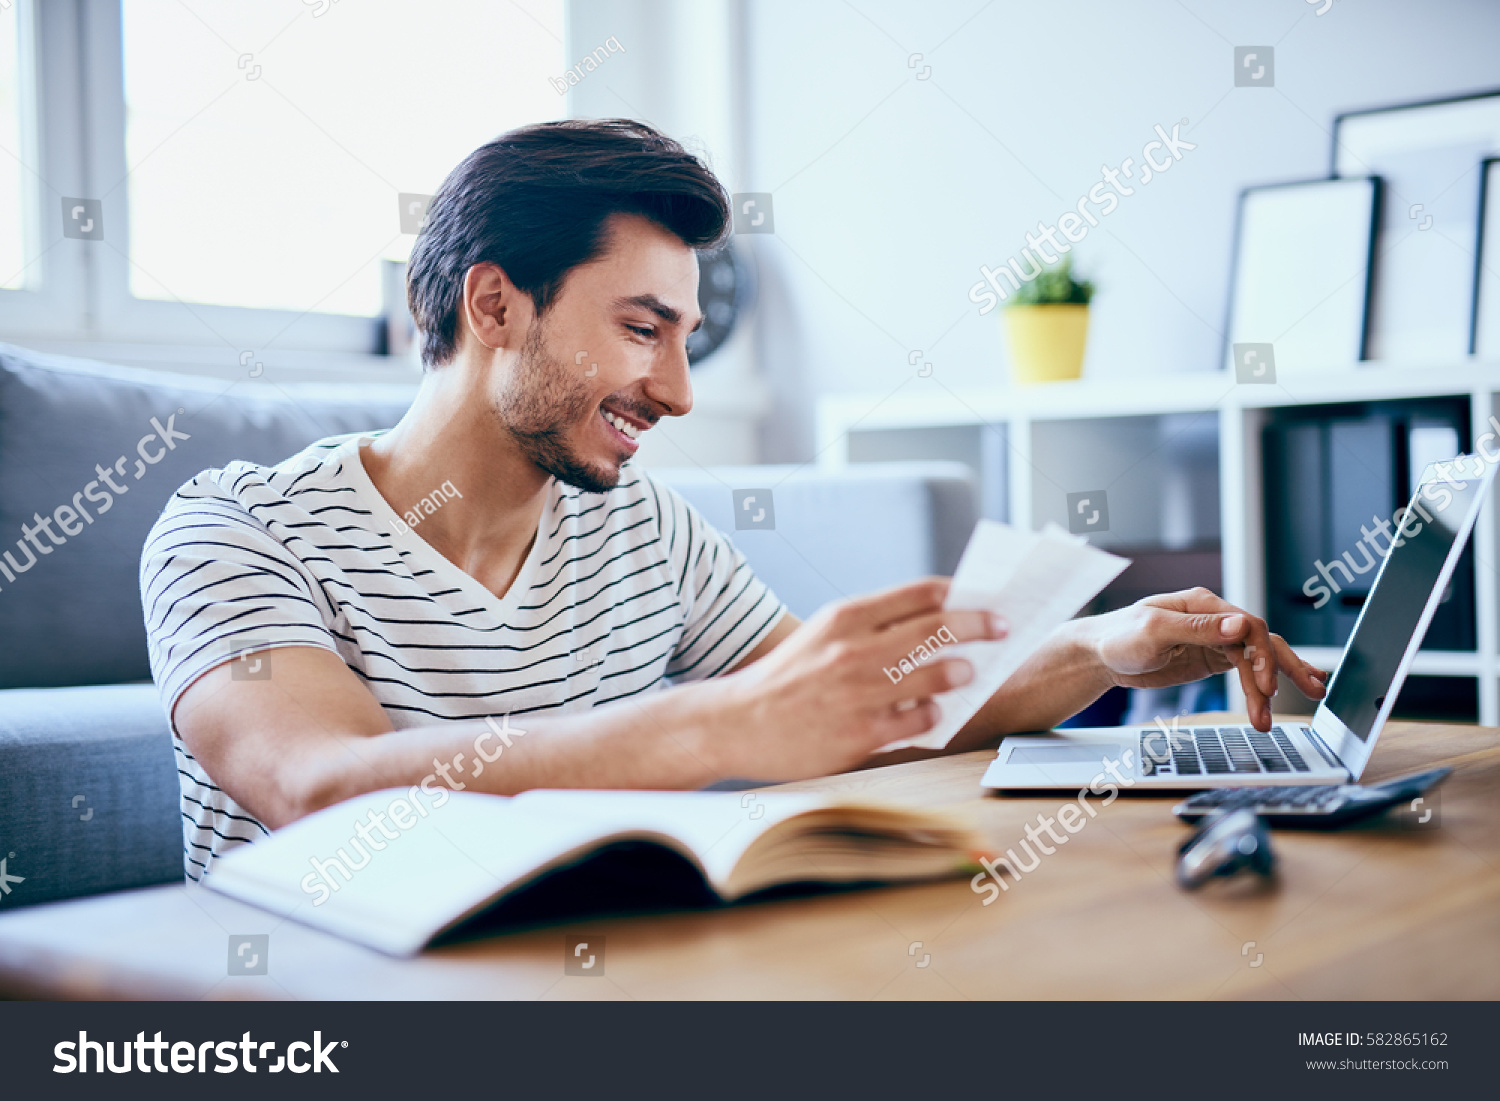 Happy man paying bills on his laptop in living room #582865162